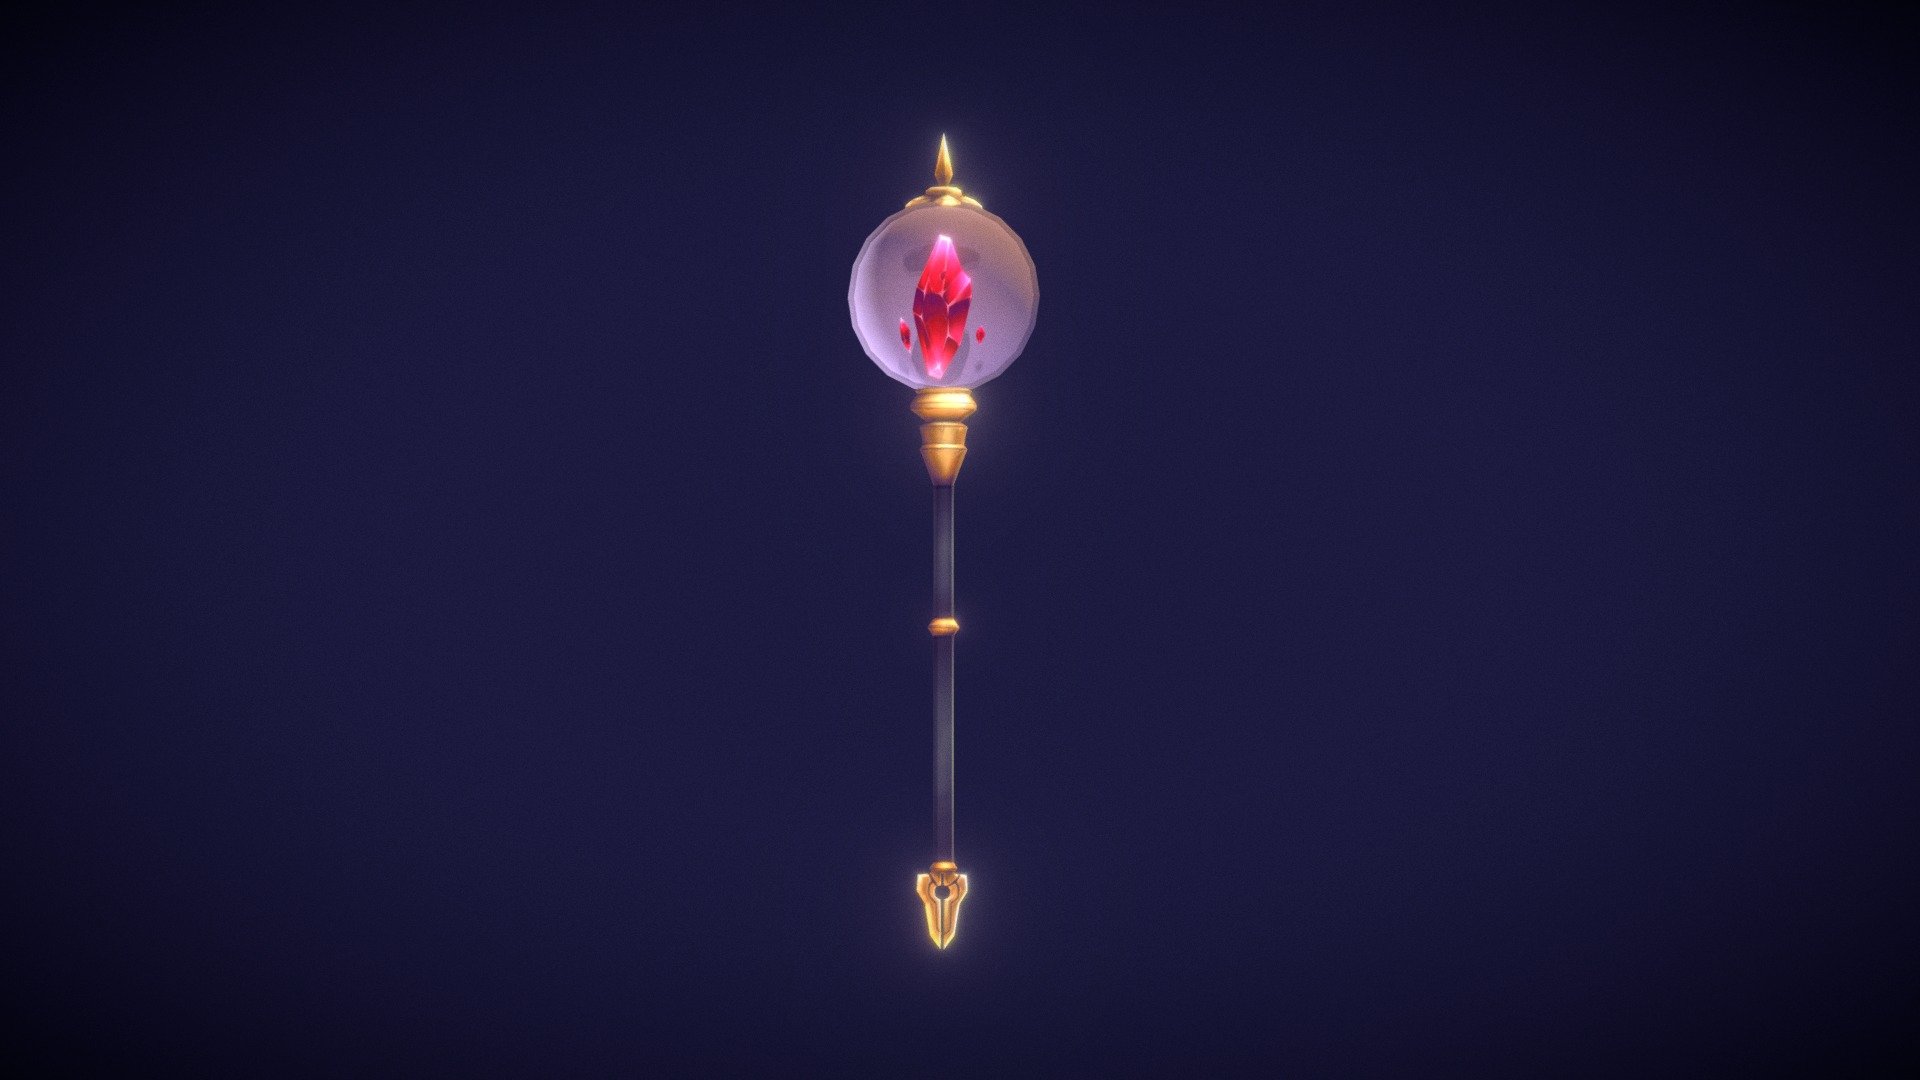 Trainee magician’s entry weapon.
Magic Stone can enhance the ability of teleportation.

見習魔法師的入門武器，魔法石可以增強傳送術的能力。 - 【Magic Staff】 - 3D model by 5454 3d model